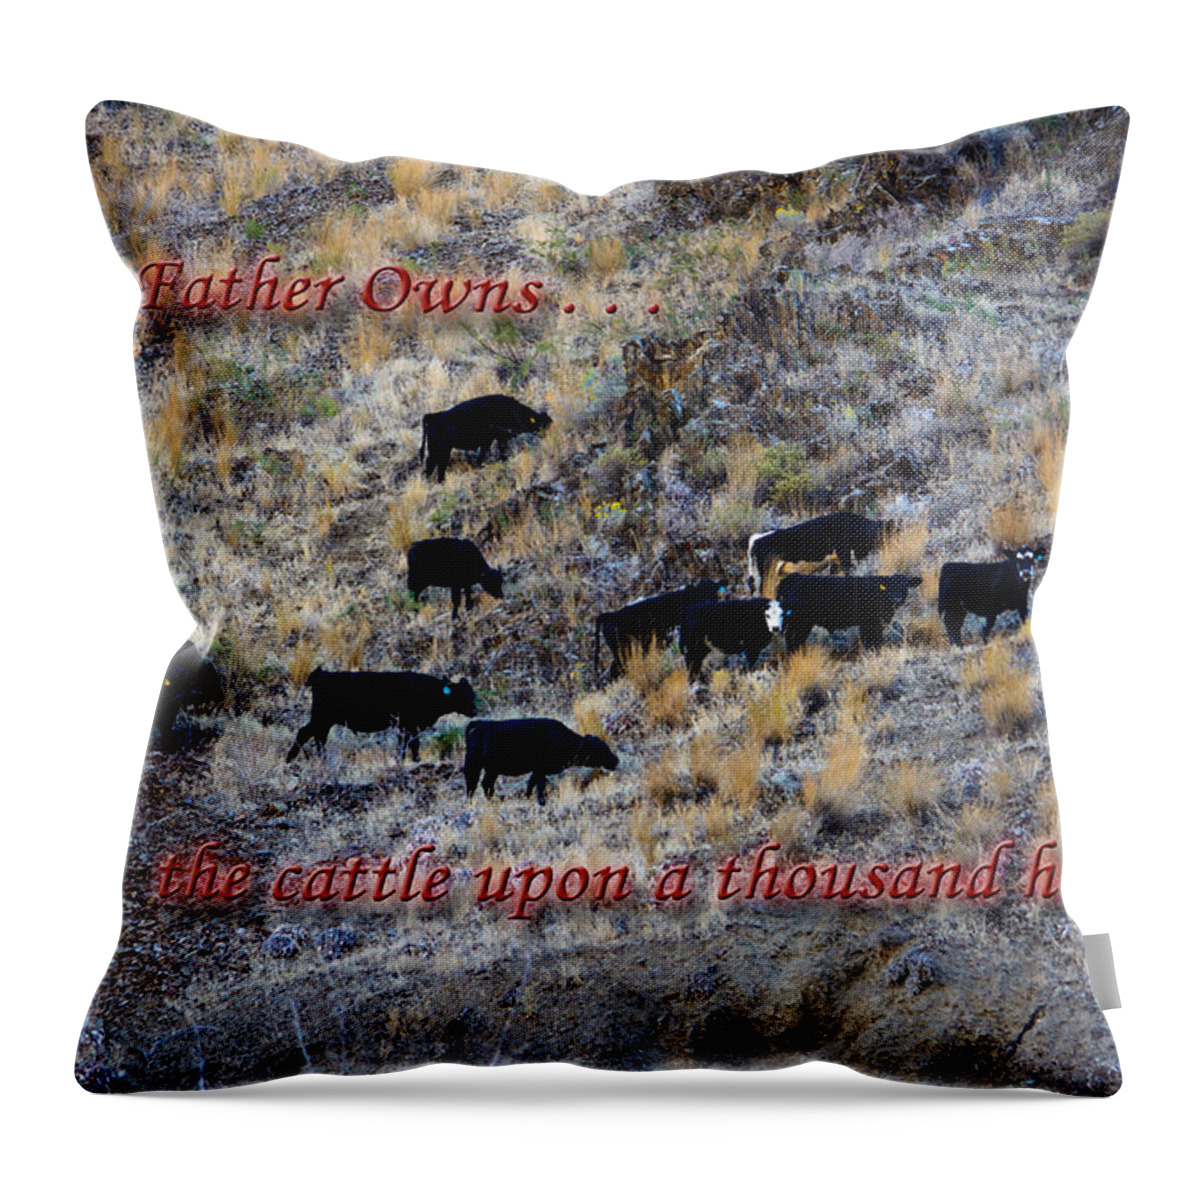 Verse Throw Pillow featuring the photograph Our Father Owns by Tikvah's Hope